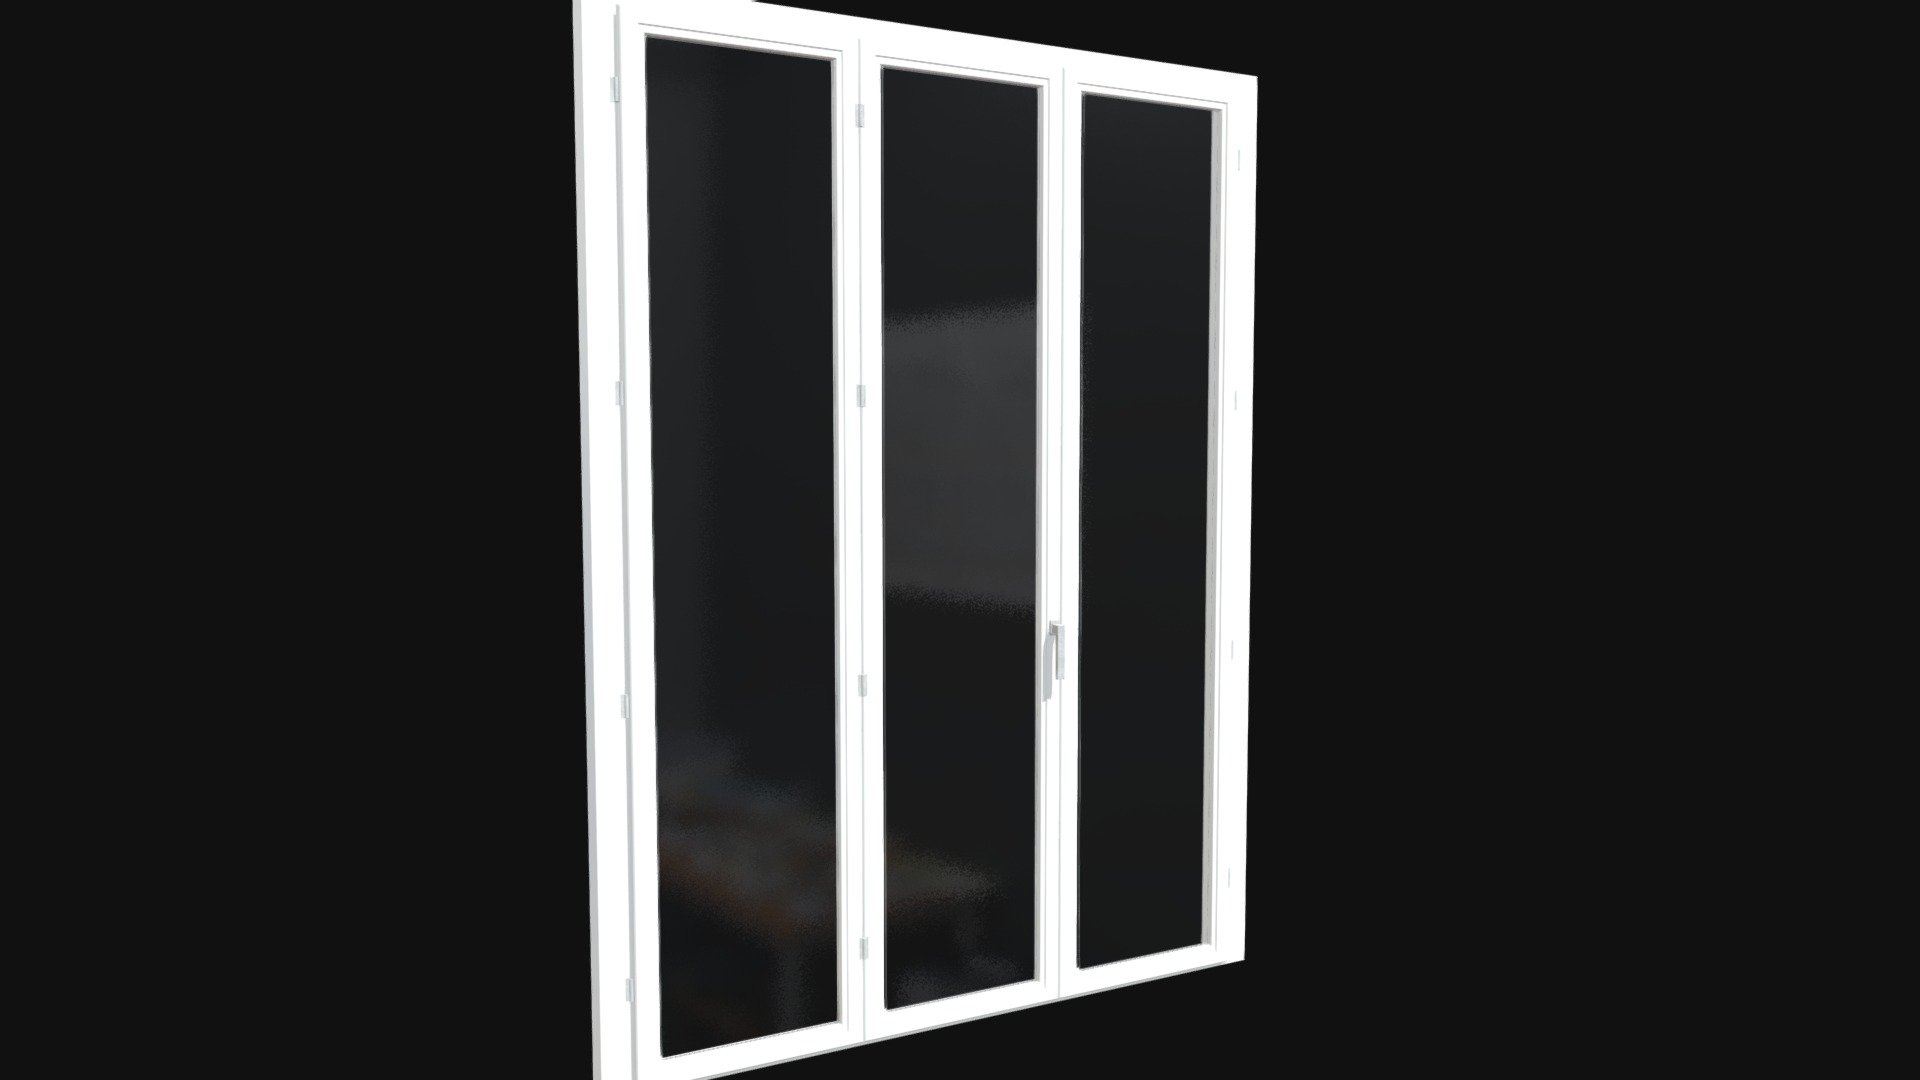 === The following description refers to the additional ZIP package provided with this model ===

A 3-panels French window door 3D Model. 8 individual objects (1 frame, 1 handle, 3 door frames, 3 windows; so, you can easily rotate or even animate them &mdash; see preview images), sharing 2 non overlapping UV Layout maps, Materials and PBR Textures sets. Production-ready 3D Model, with PBR materials, textures, non overlapping UV Layout map provided in the package.

Quads only geometries (no tris/ngons).

Formats included: FBX, OBJ; scenes: BLEND (with Cycles / Eevee PBR Materials and Textures); other: png with Alpha.

8 Objects (meshes), 2 PBR Materials, UV unwrapped (non overlapping UV Layout map provided in the package); UV-mapped Textures.

UV Layout maps and Image Textures resolutions: 2048x2048; PBR Textures made with Substance Painter.
Polygonal, QUADS ONLY (no tris/ngons); 20158 vertices, 20076 quad faces (40152 tris).
Real world dimensions; scene scale units: cm in Blender (that is: Metric with 0.01 scale) 3d model